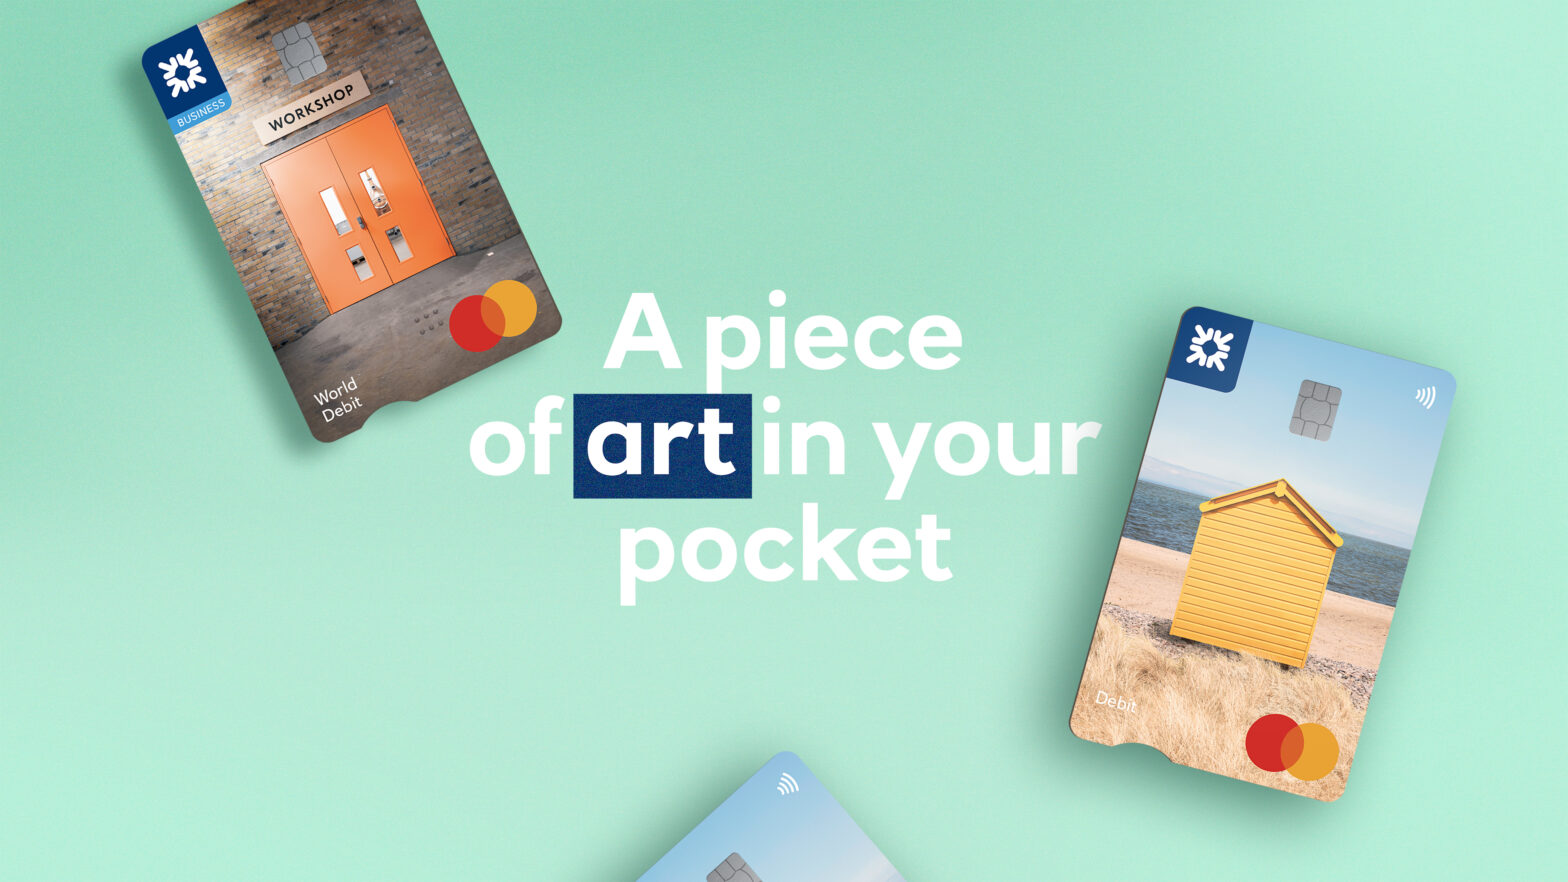 Popping a piece of art in millions of pockets across the UK.